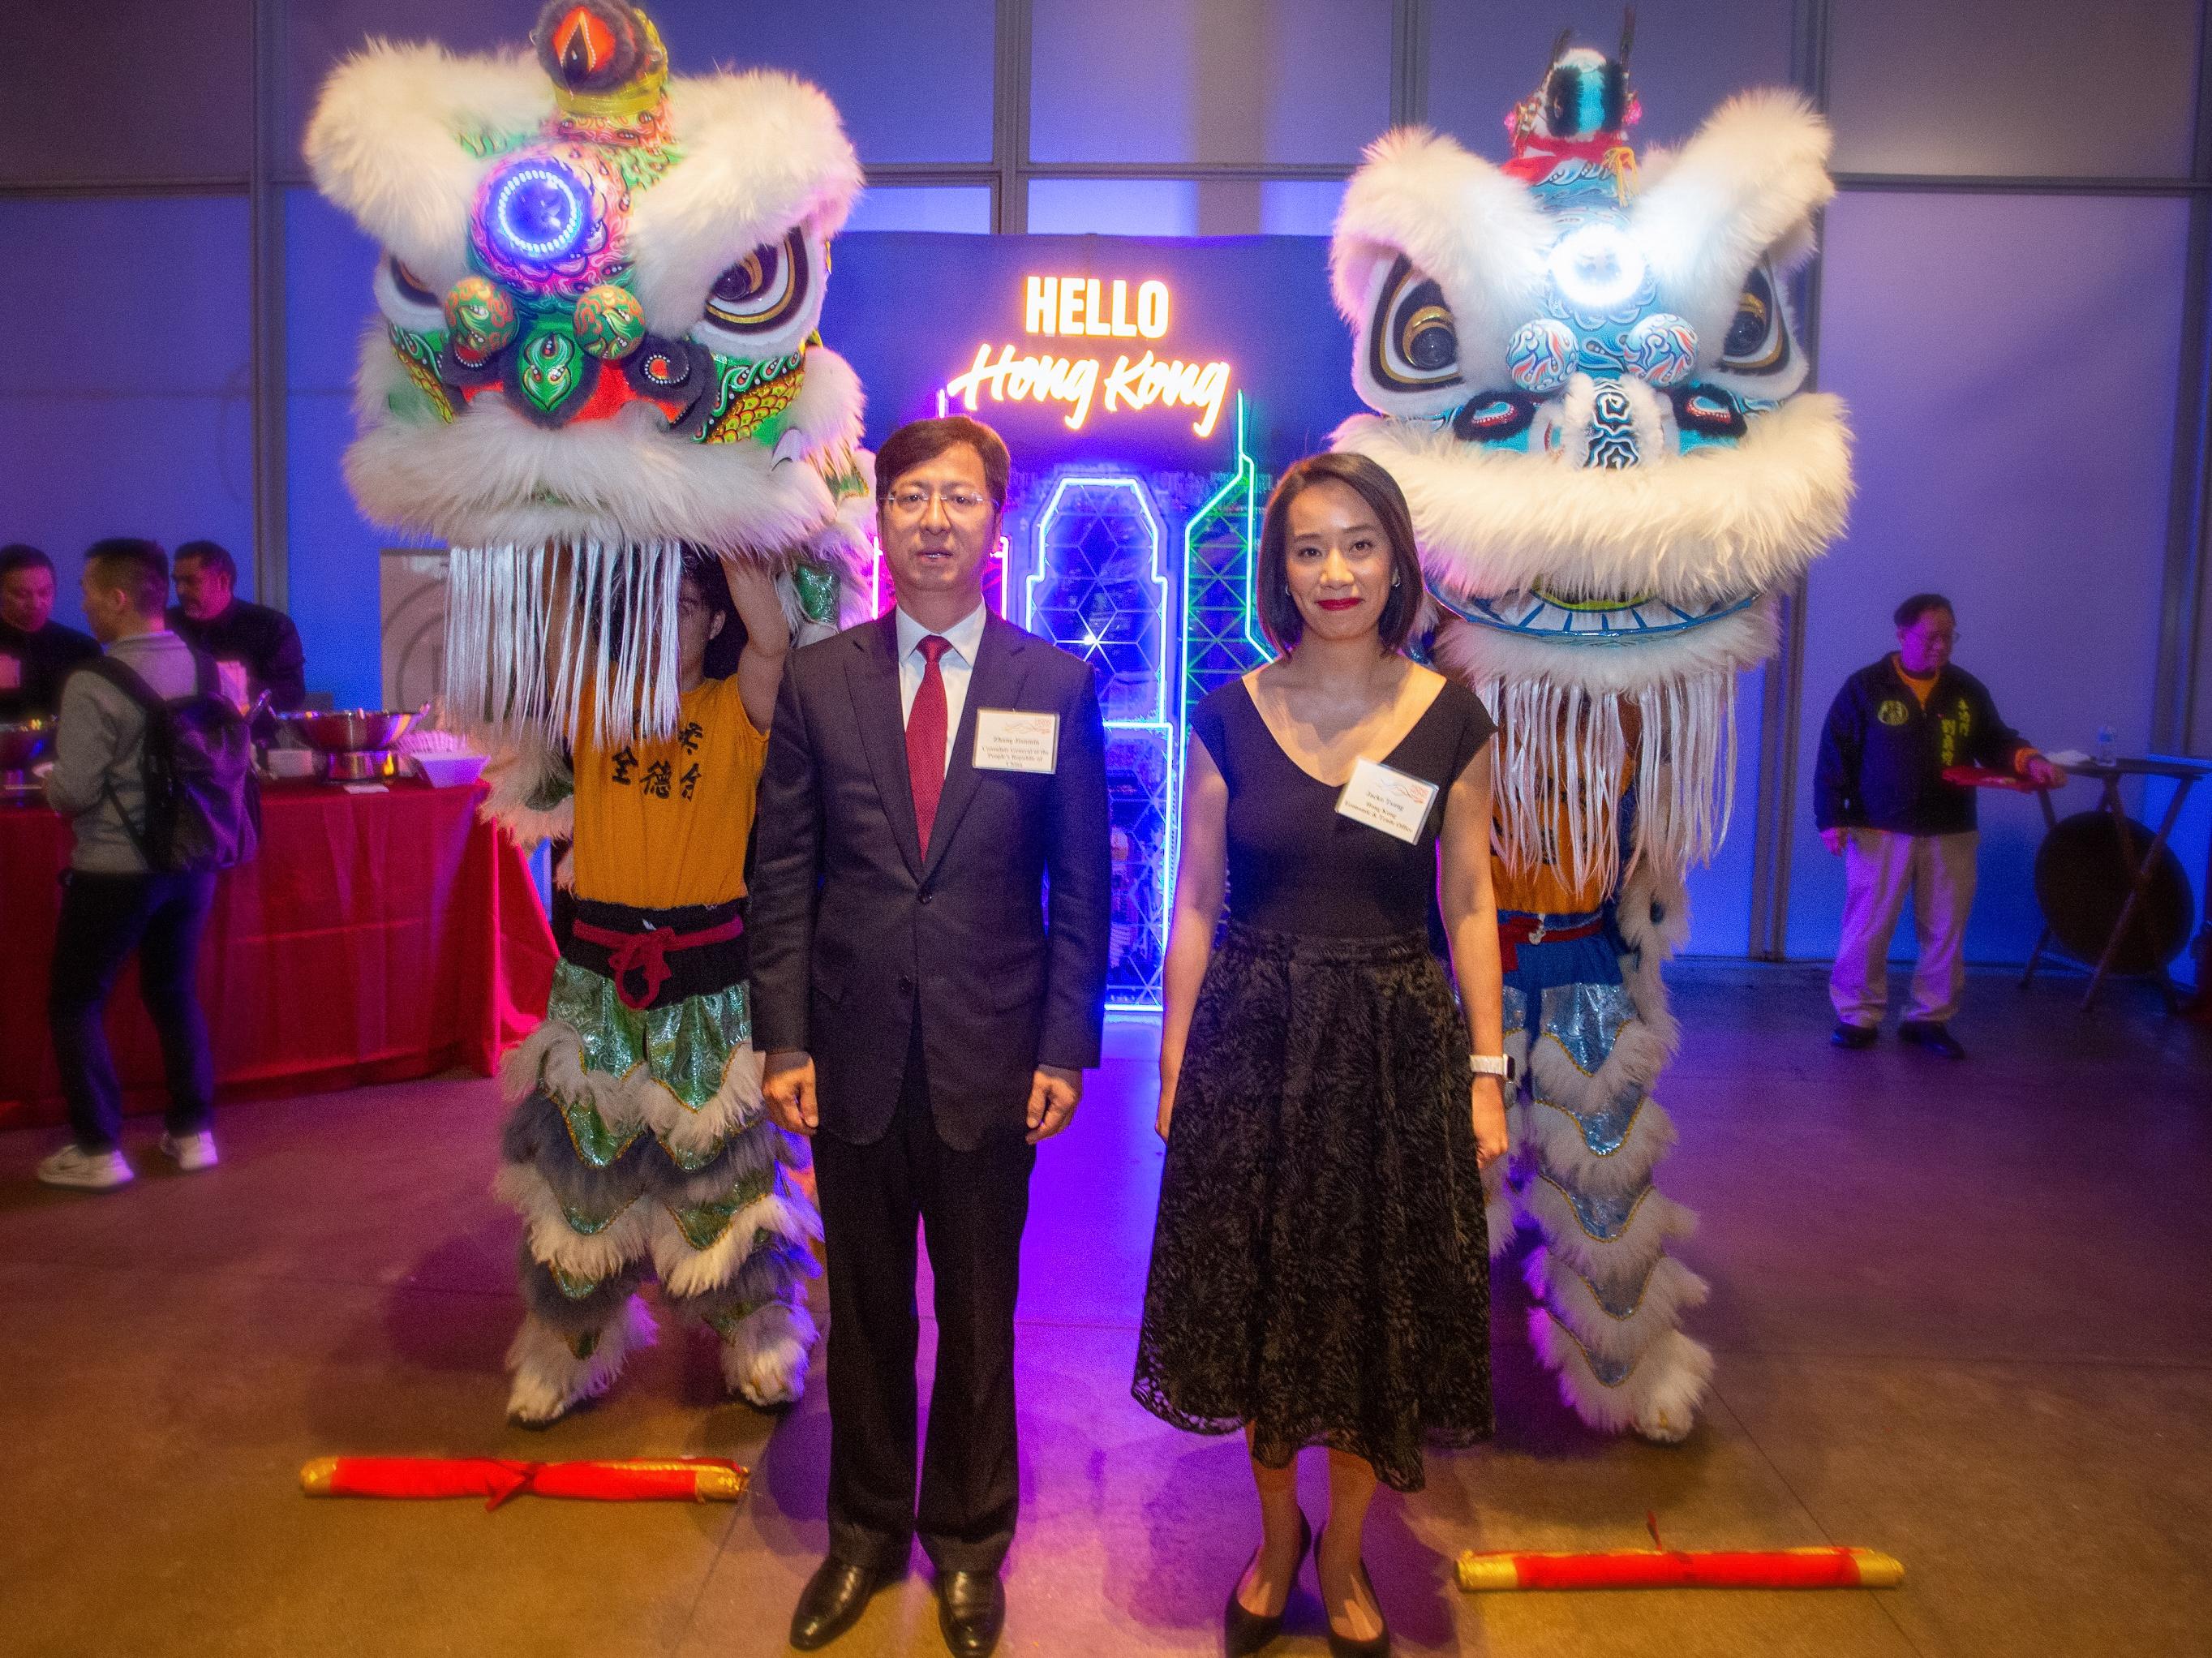 The Director of the Hong Kong Economic and Trade Office in San Francisco, Ms Jacko Tsang (right), and the Consul General of the People's Republic of China in San Francisco, Mr Zhang Jianmin (left), performed an  eye-dotting ceremony at the spring reception in San Francisco on February 27 (San Francisco time).